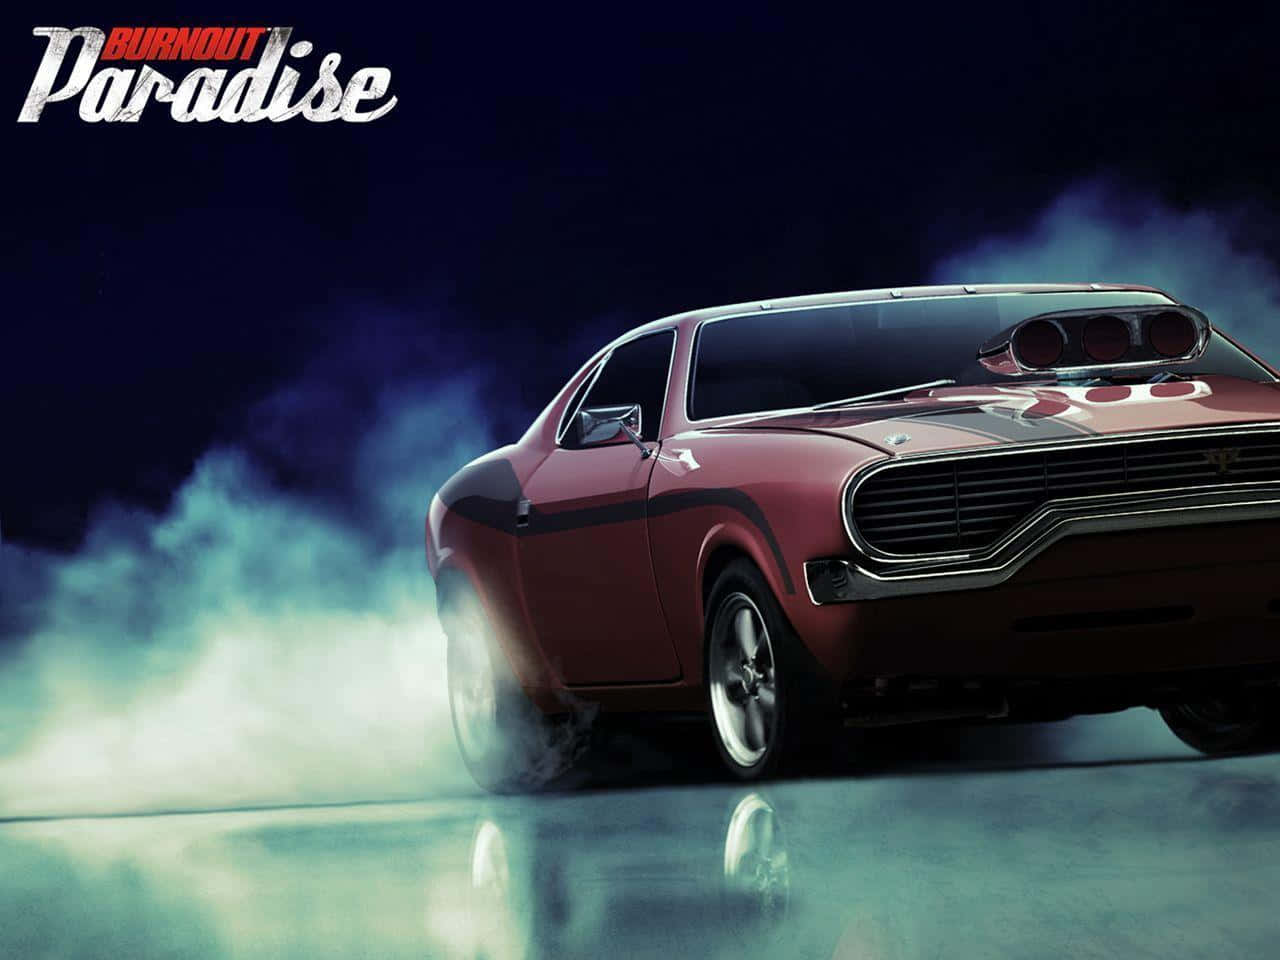 modified muscle cars wallpaper